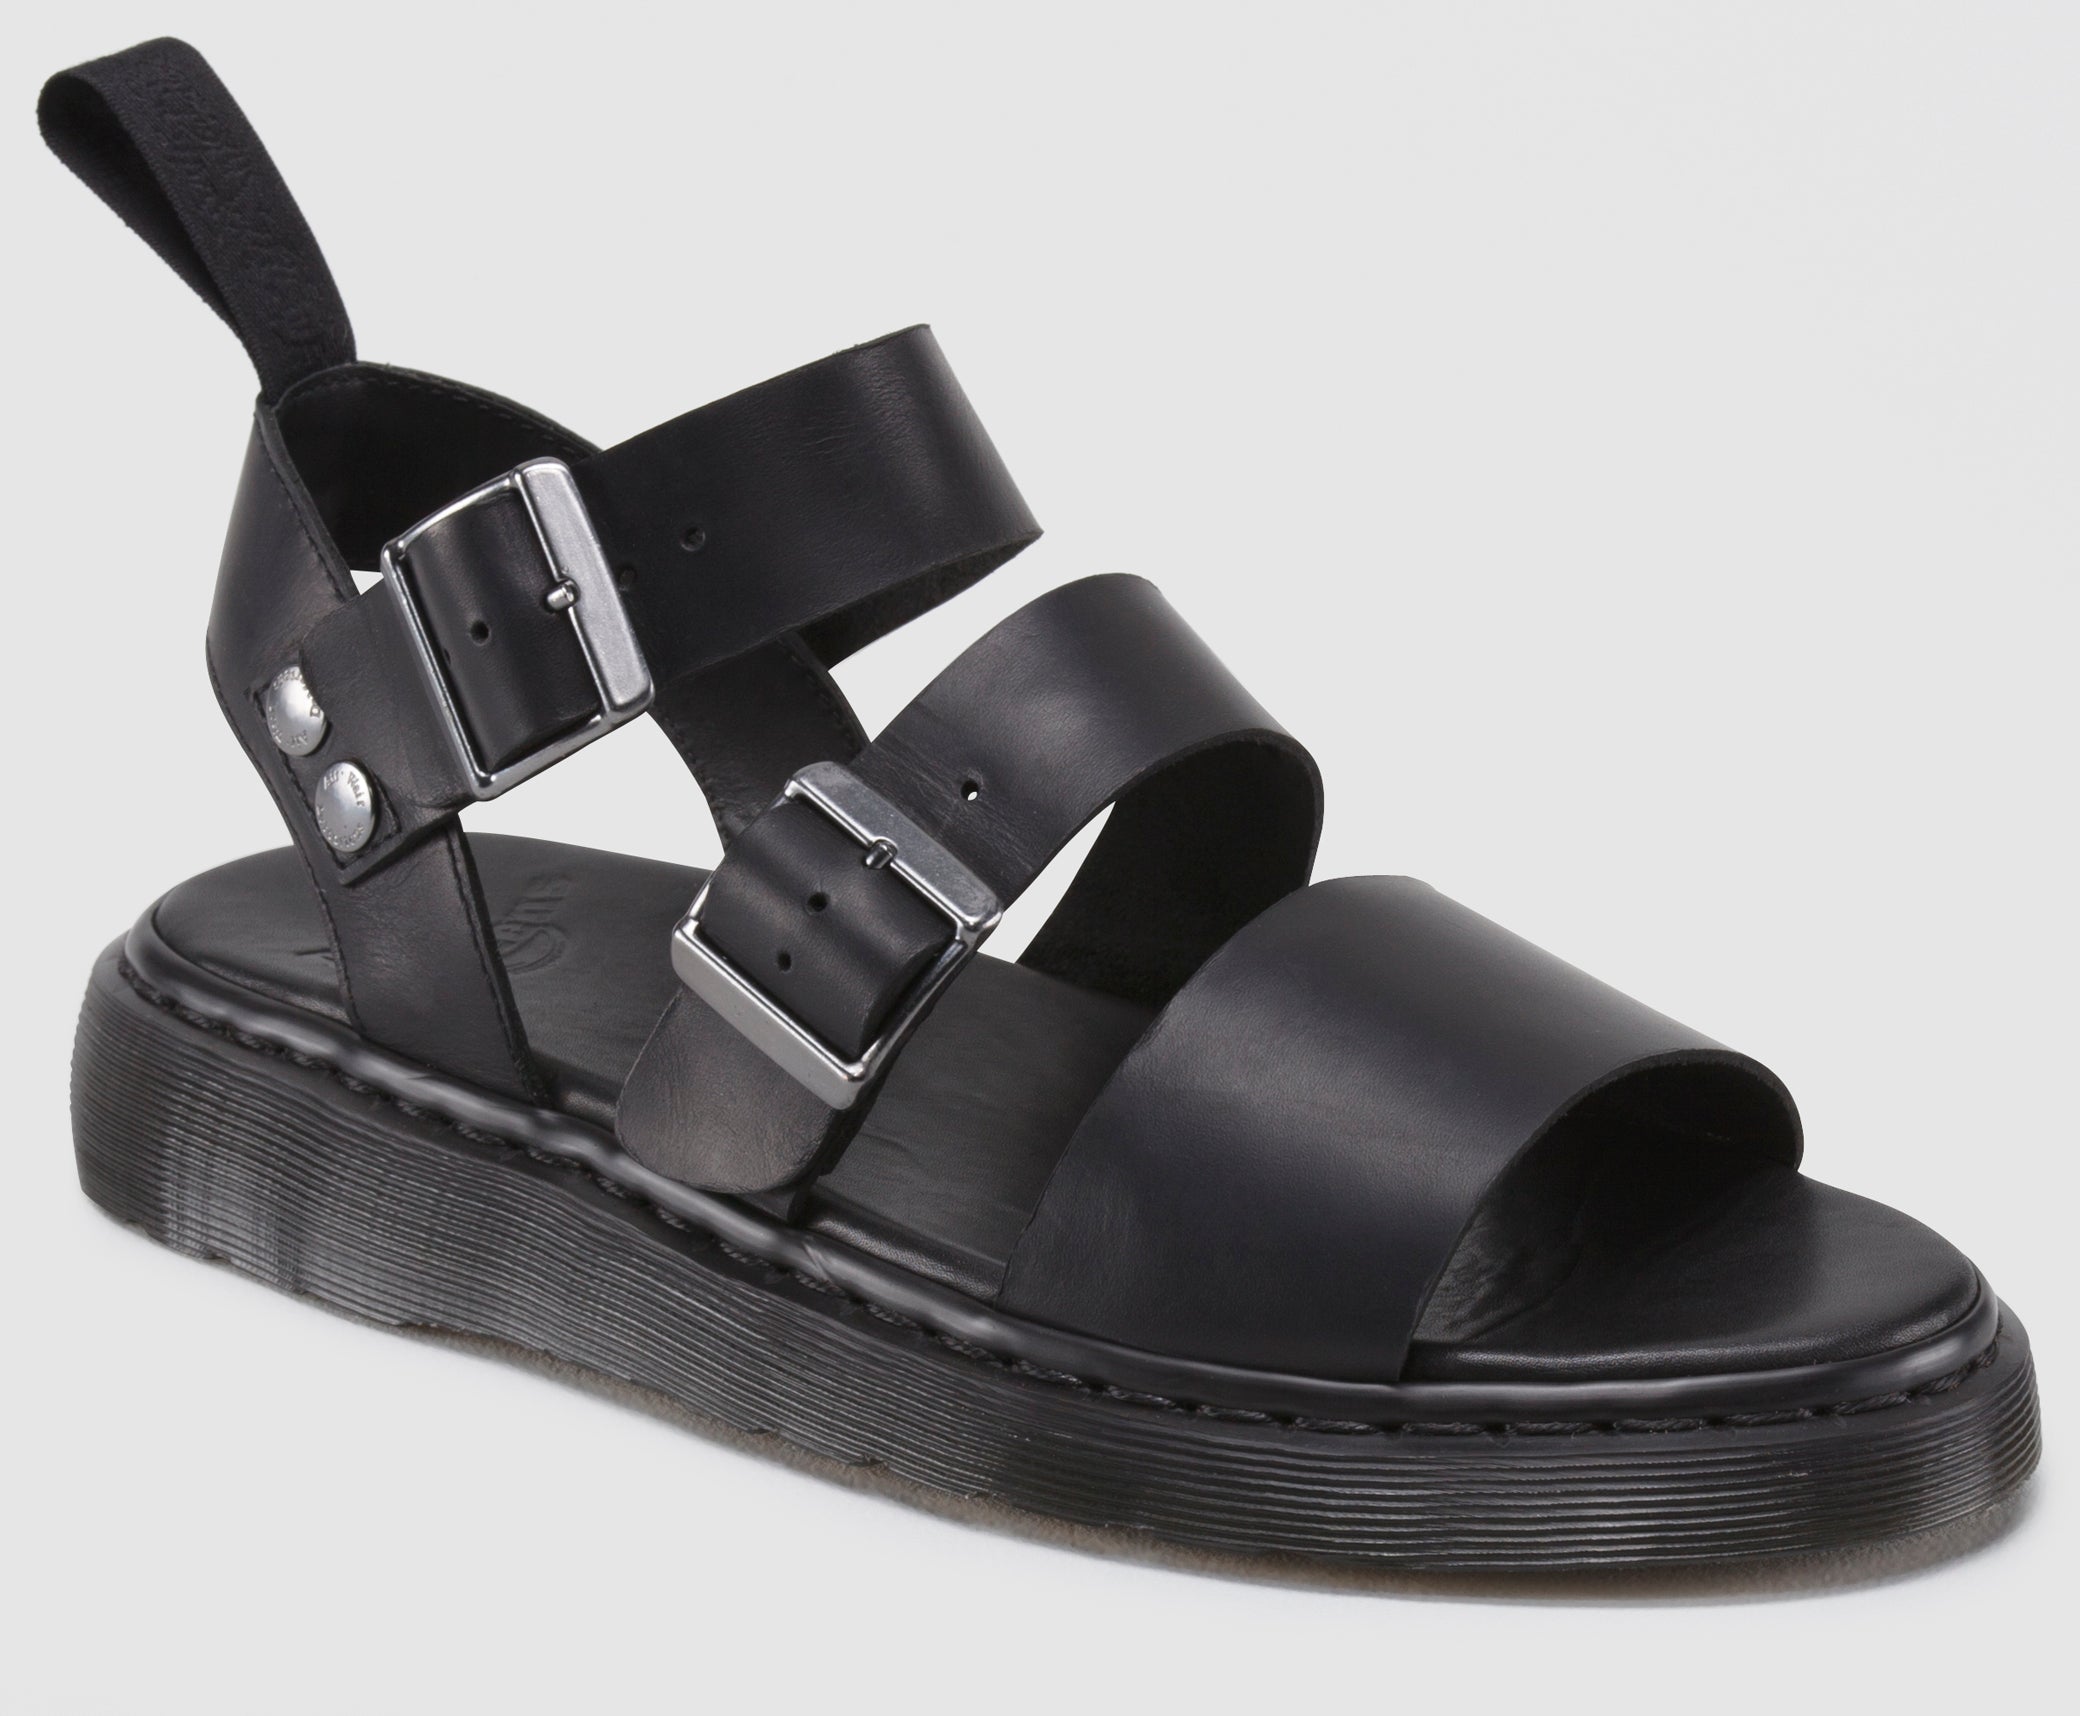 Gryphon Sandals – Posers Hollywood